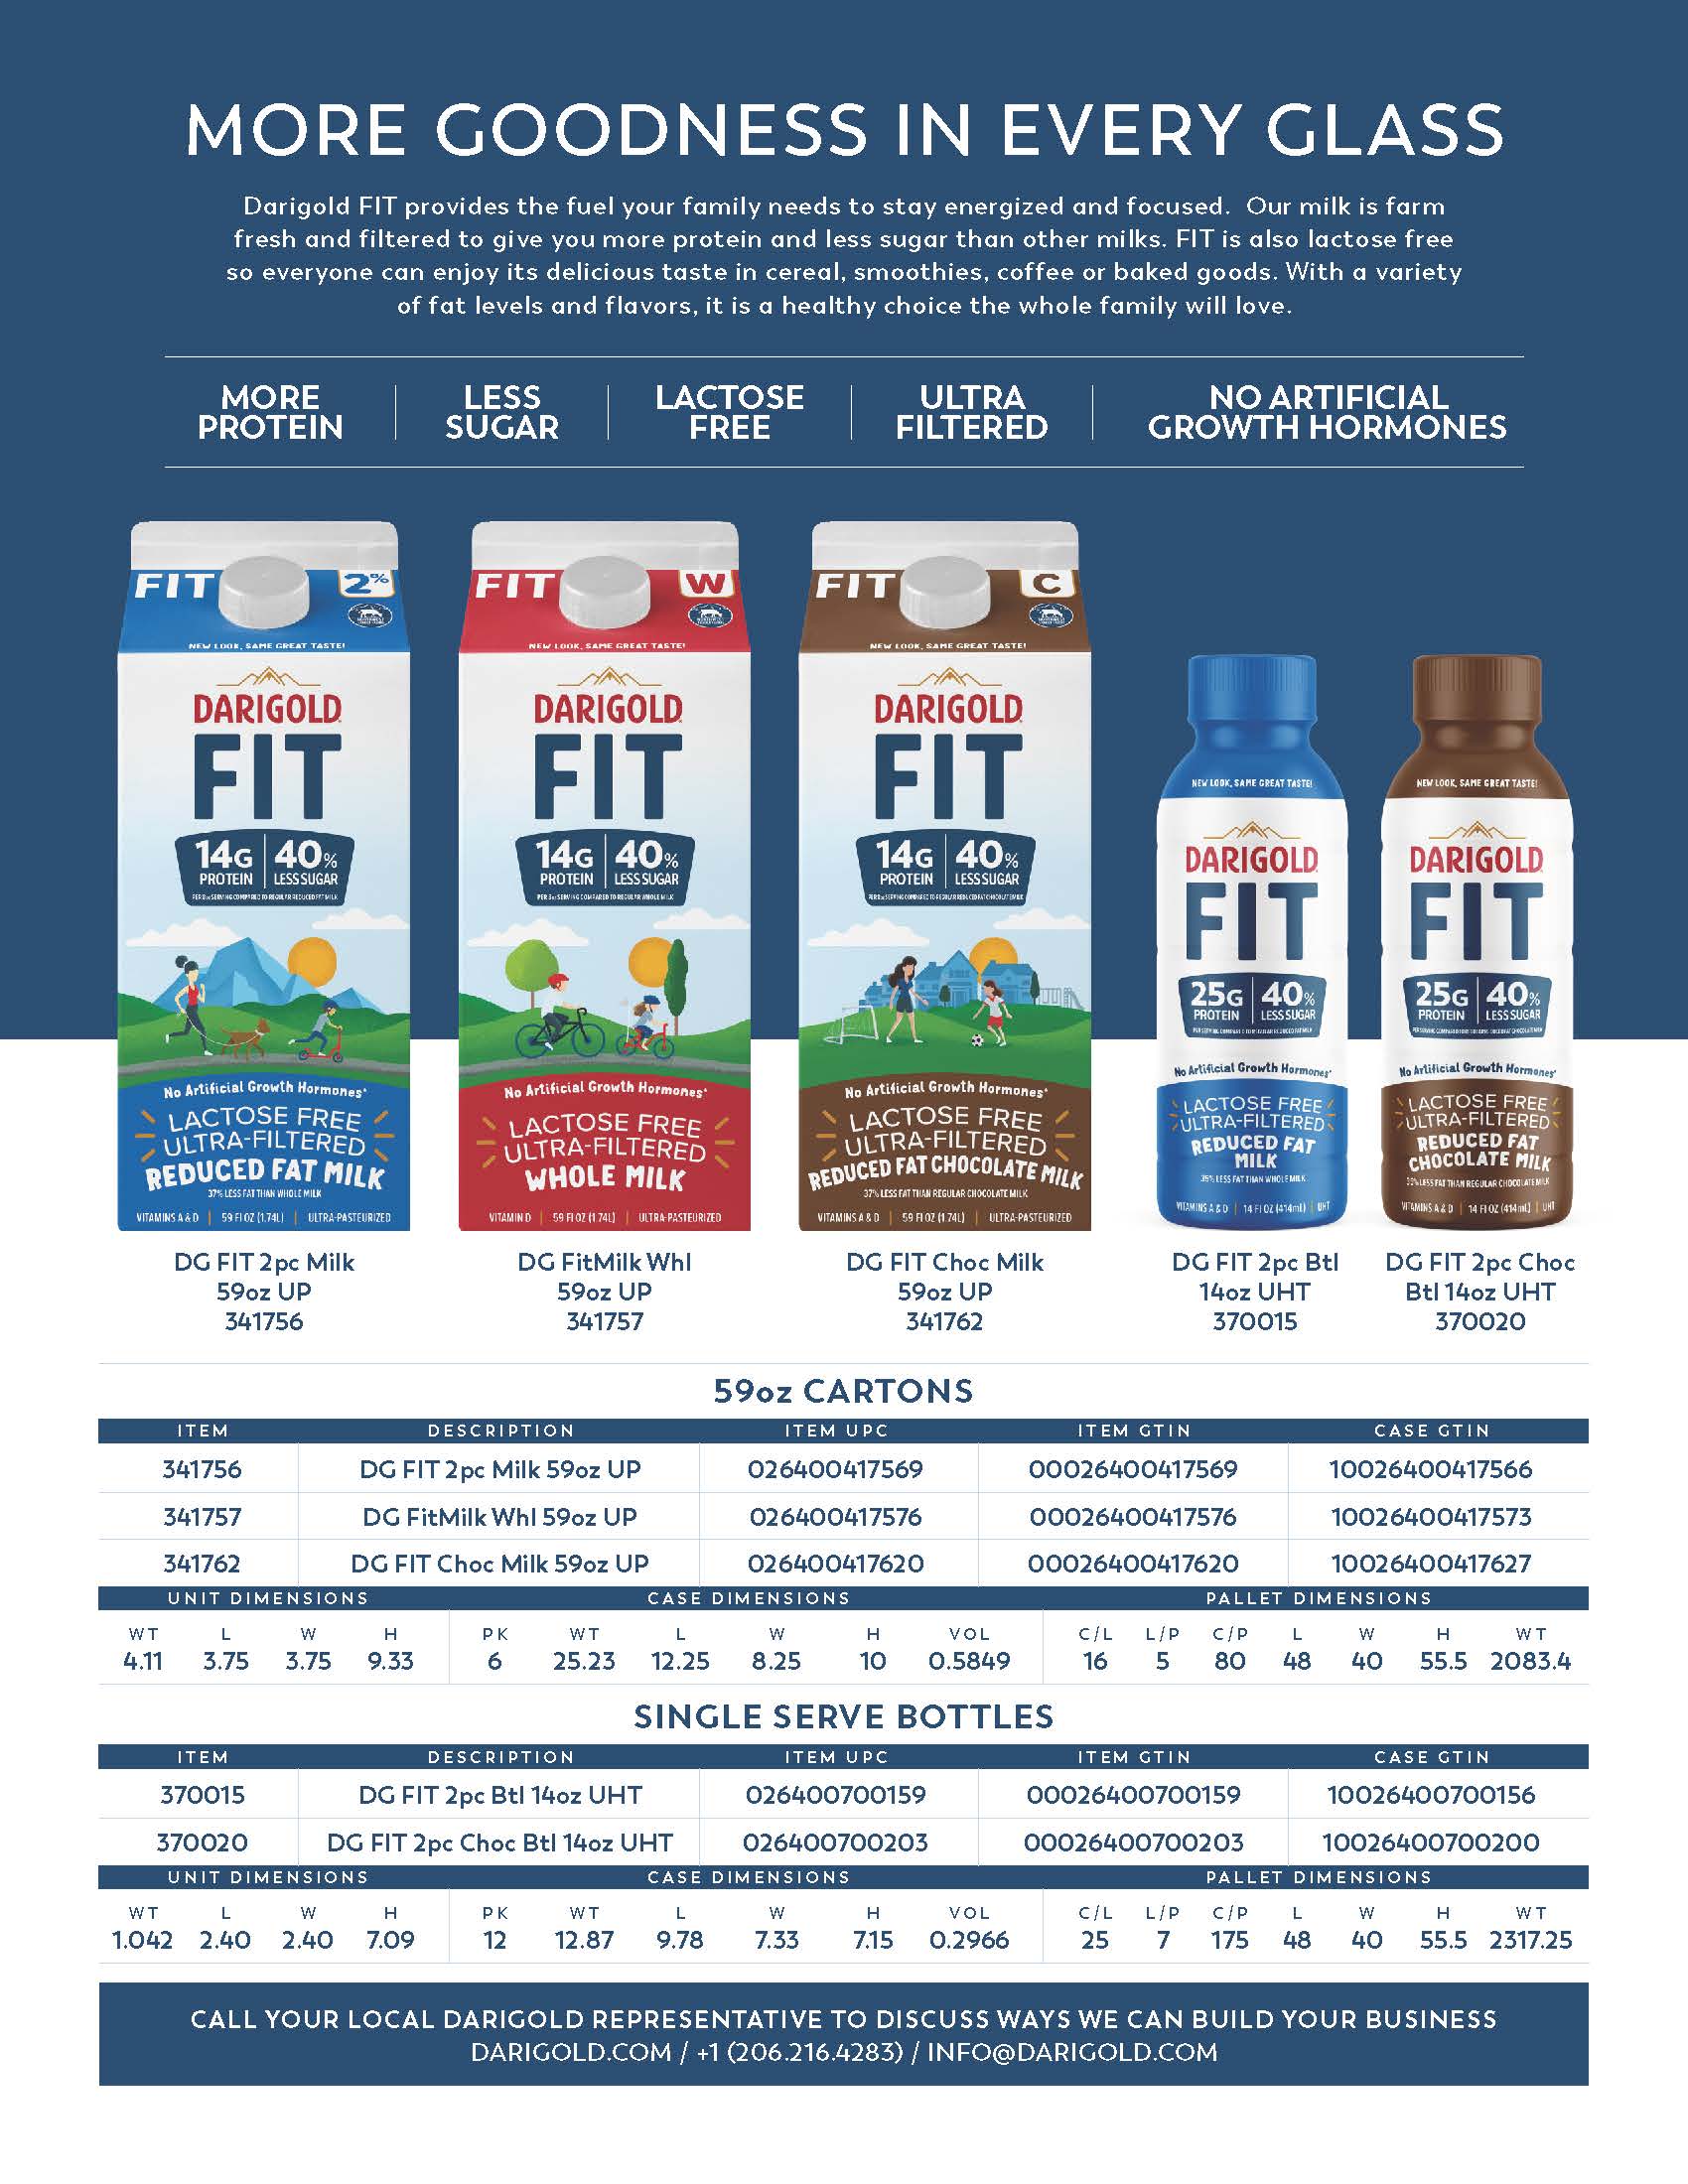 Product and Spec information for Darigold FIT 59oz cartons and 14oz UHT bottles